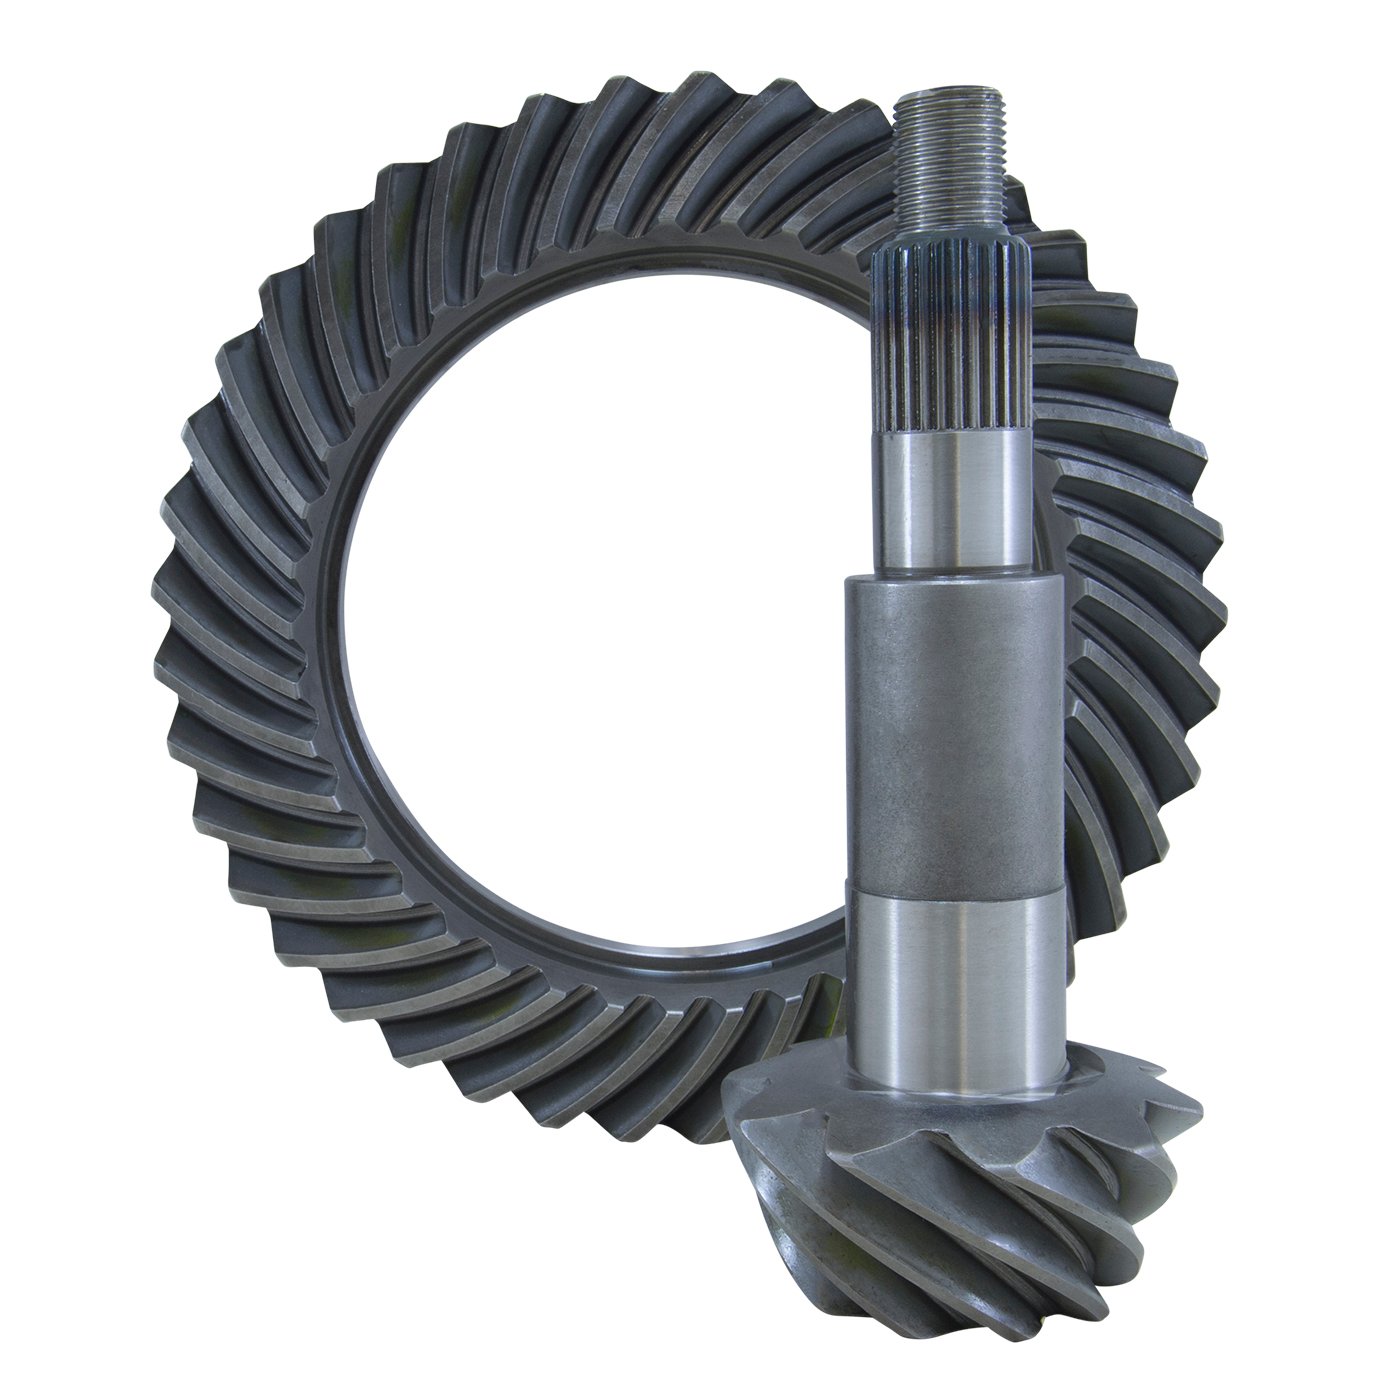 USA Standard ZG D70-411 Replacement Ring & Pinion Gear Set, For Dana 70, 4.11 Ratio